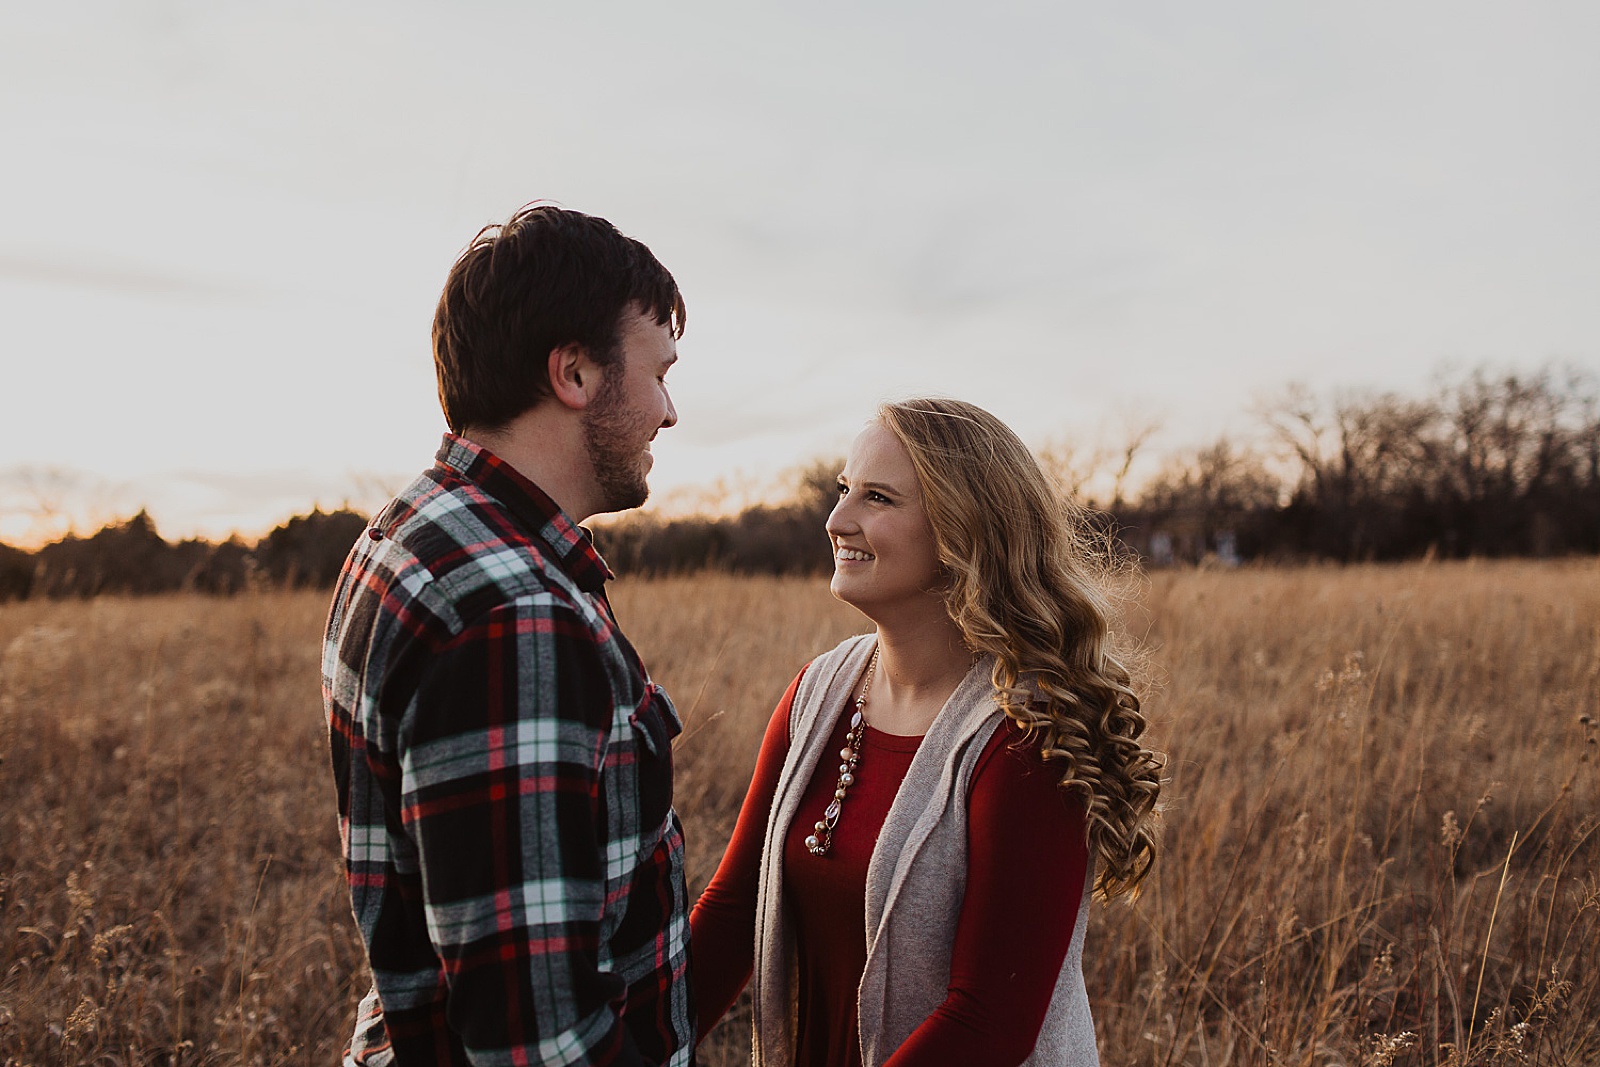 Winter Christmas in Wichita Engagement Photos by Caitlyn Cloud Photography